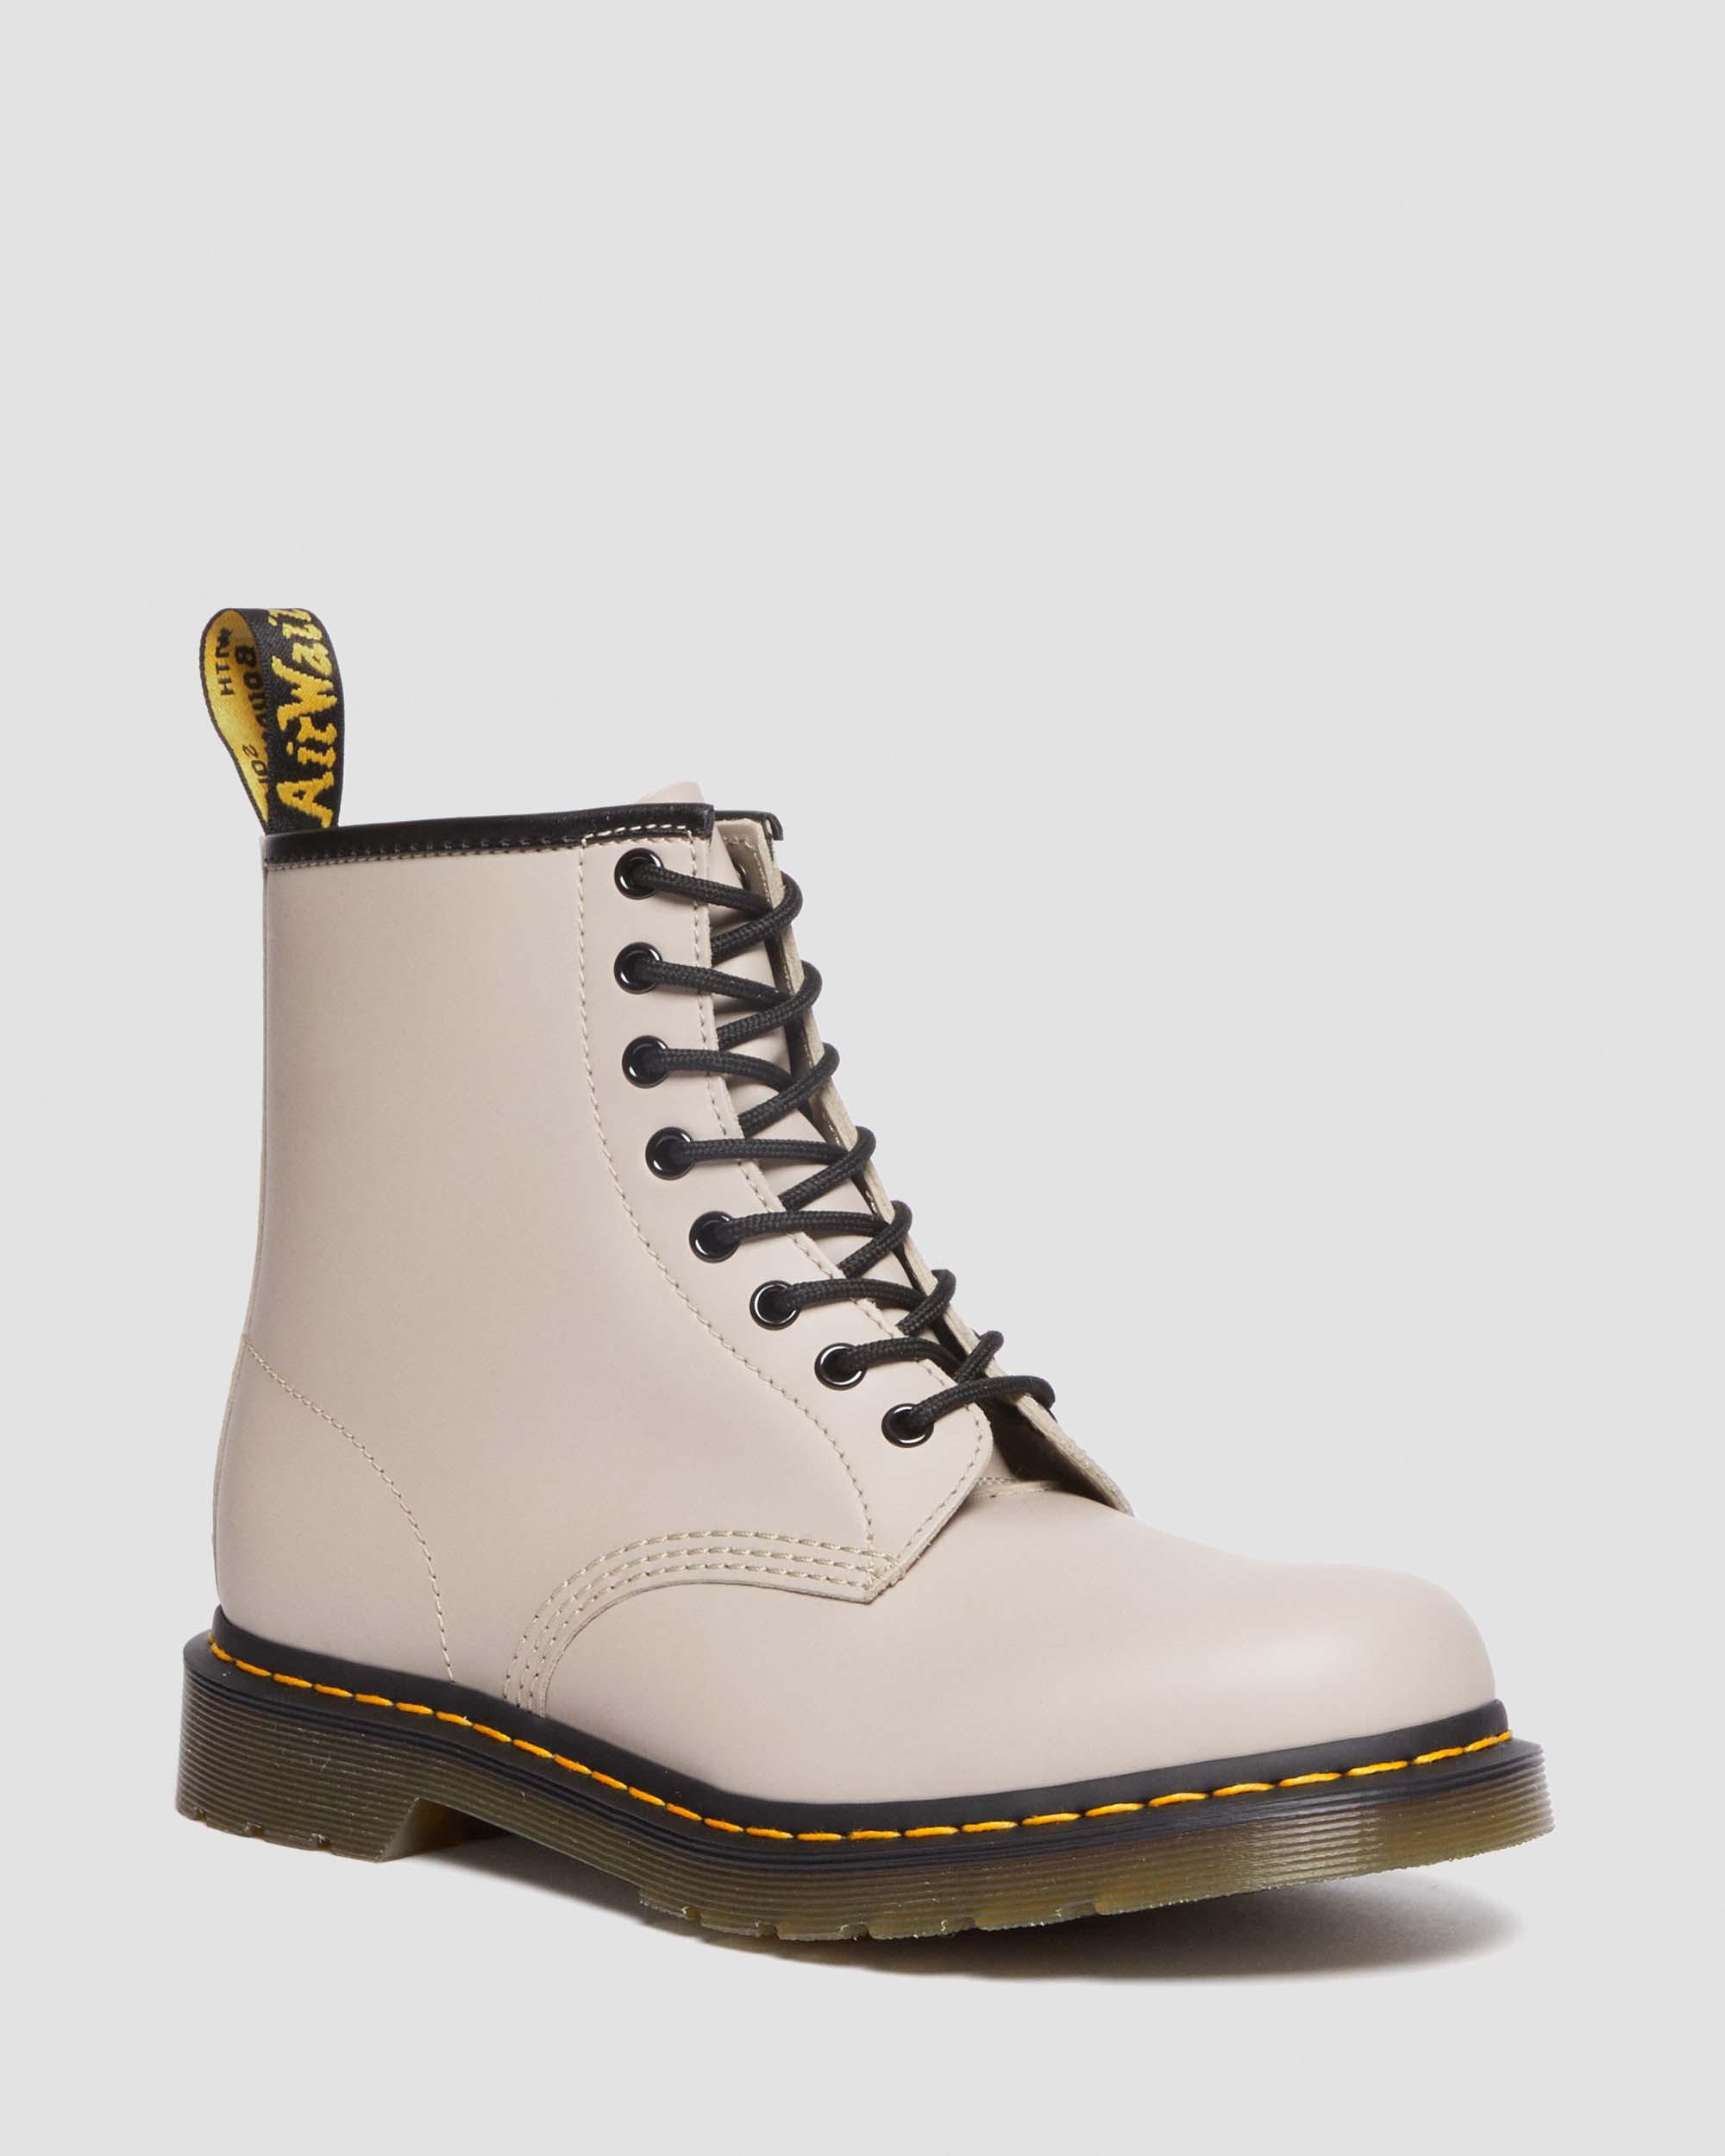 DR MARTENS 1460 Smooth Leather Lace Up Boots